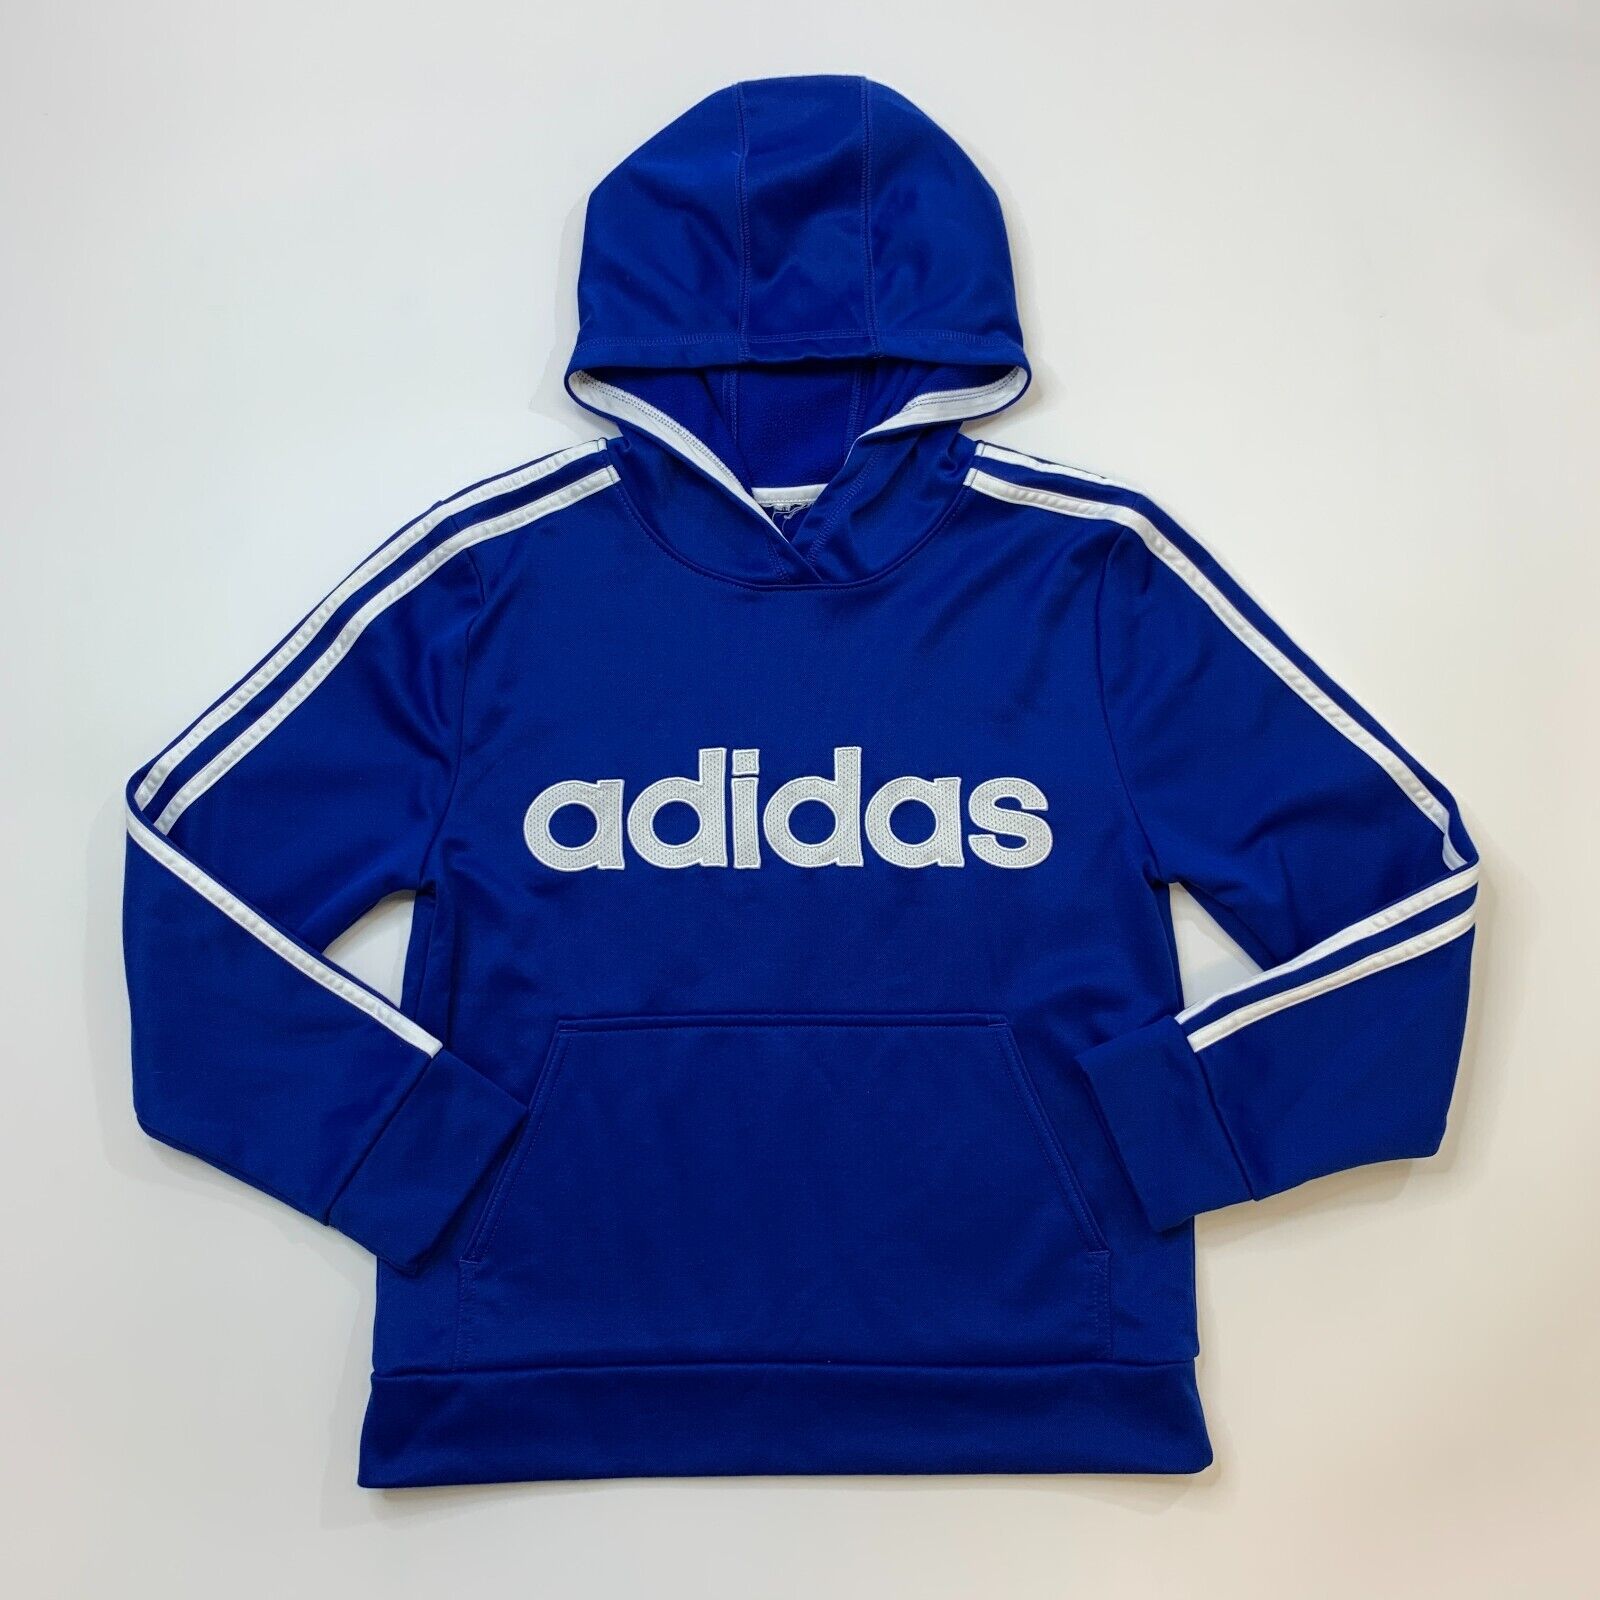 Giftig andere geest Adidas Sweatshirt Boys Youth S Small Blue White 3 Stripes Embroidered Hoodie  | eBay